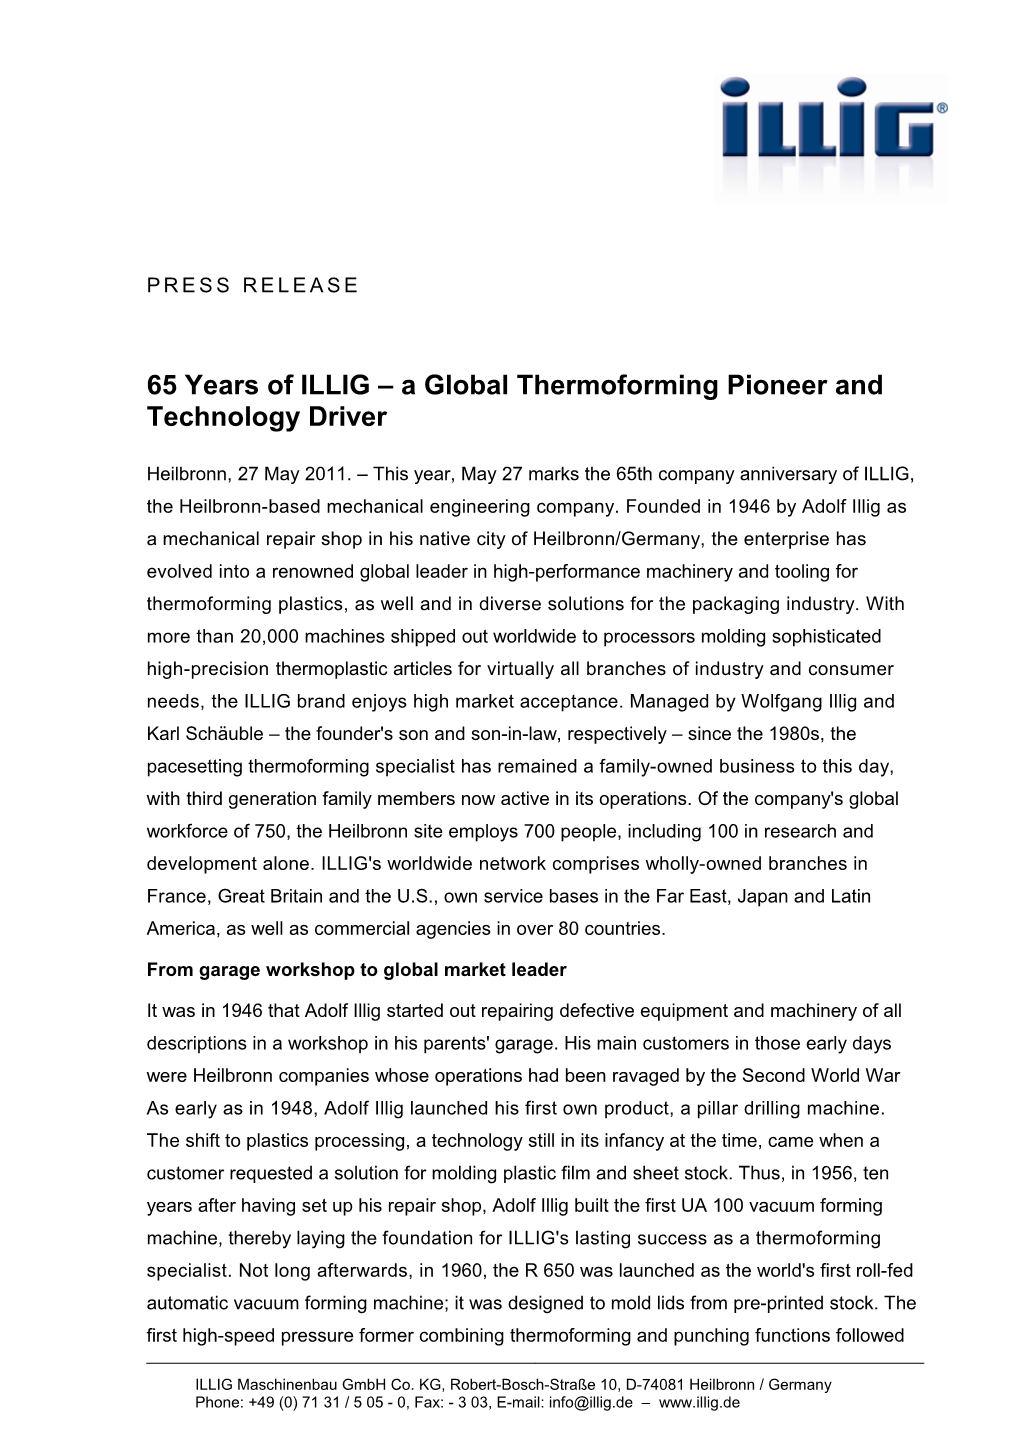 65 Years of ILLIG a Global Thermoforming Pioneer and Technology Driver